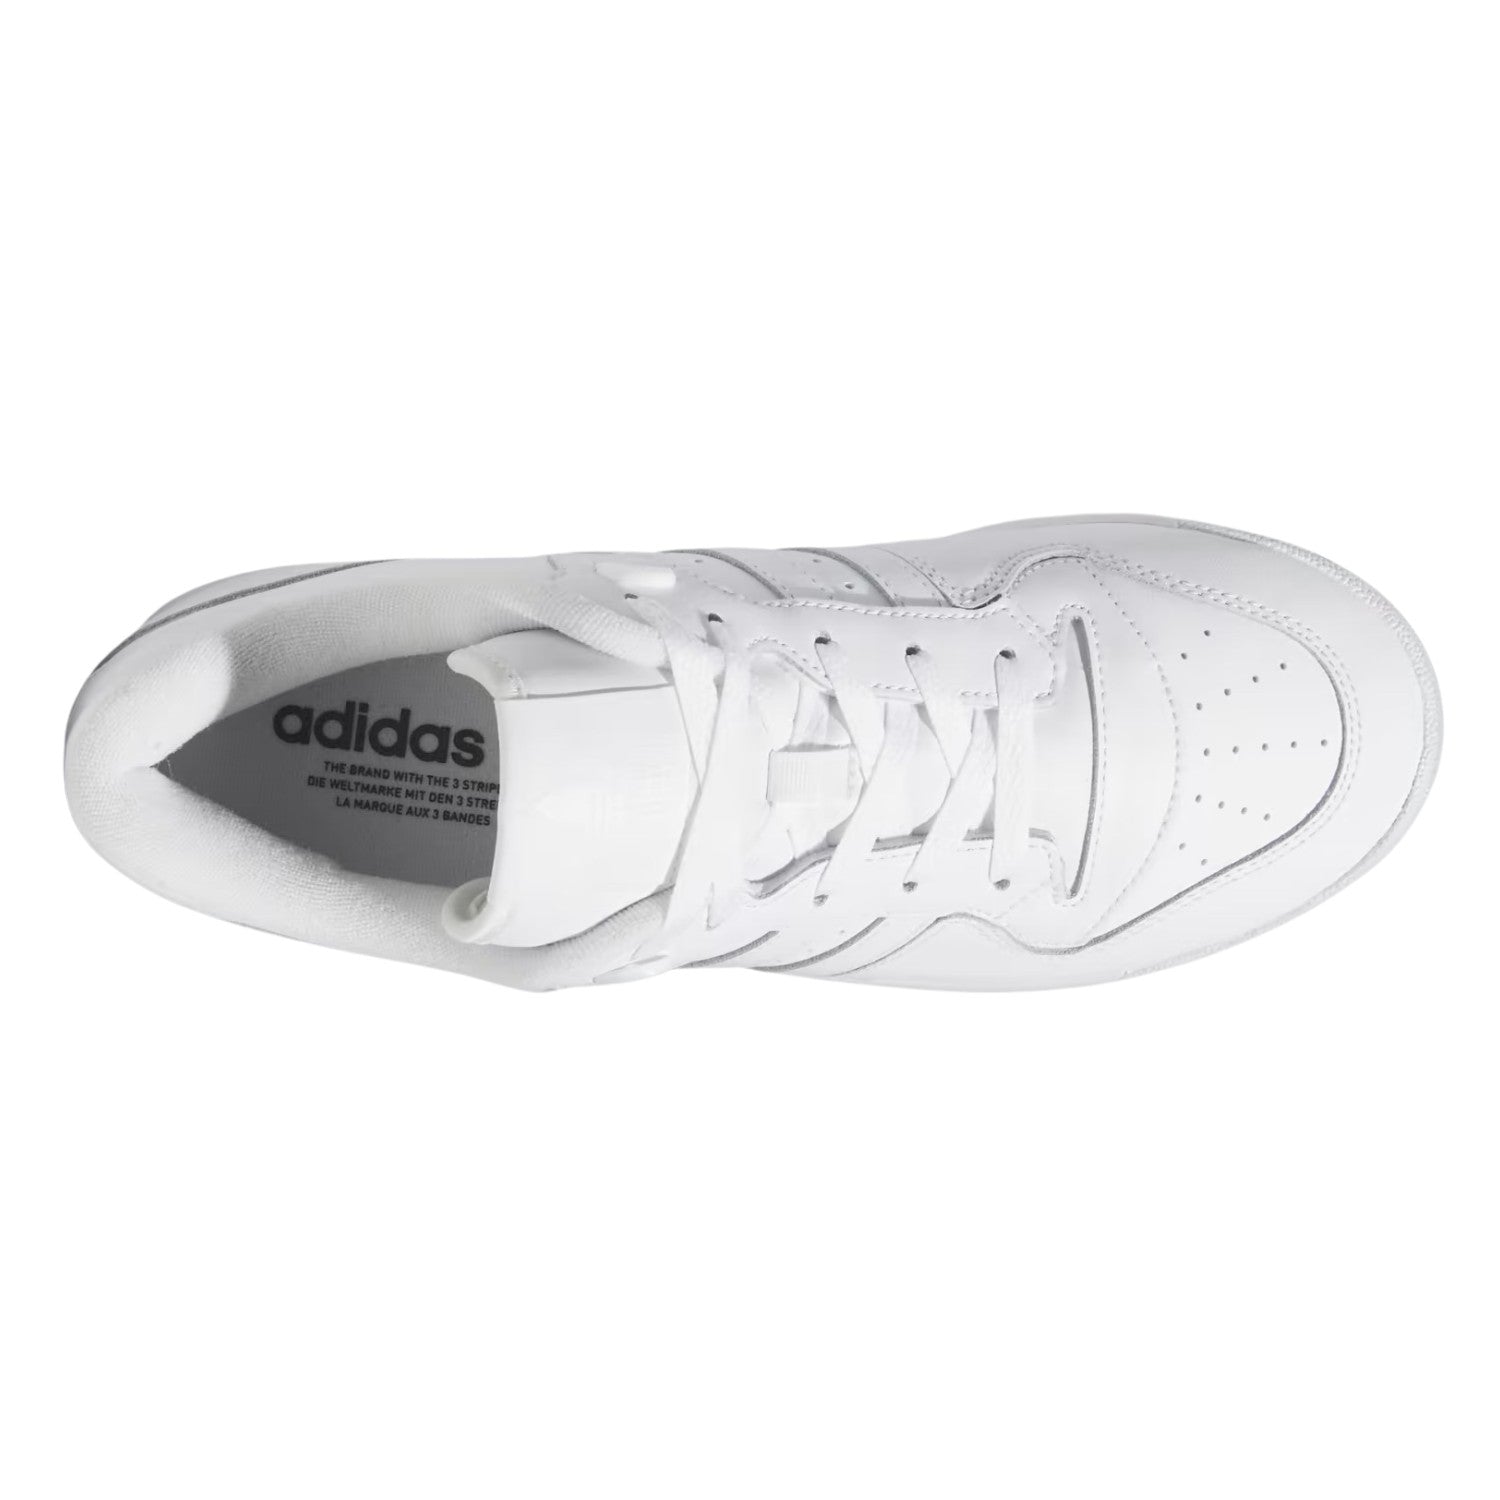 Adidas Rivalry Low Mens Style : Gx2272